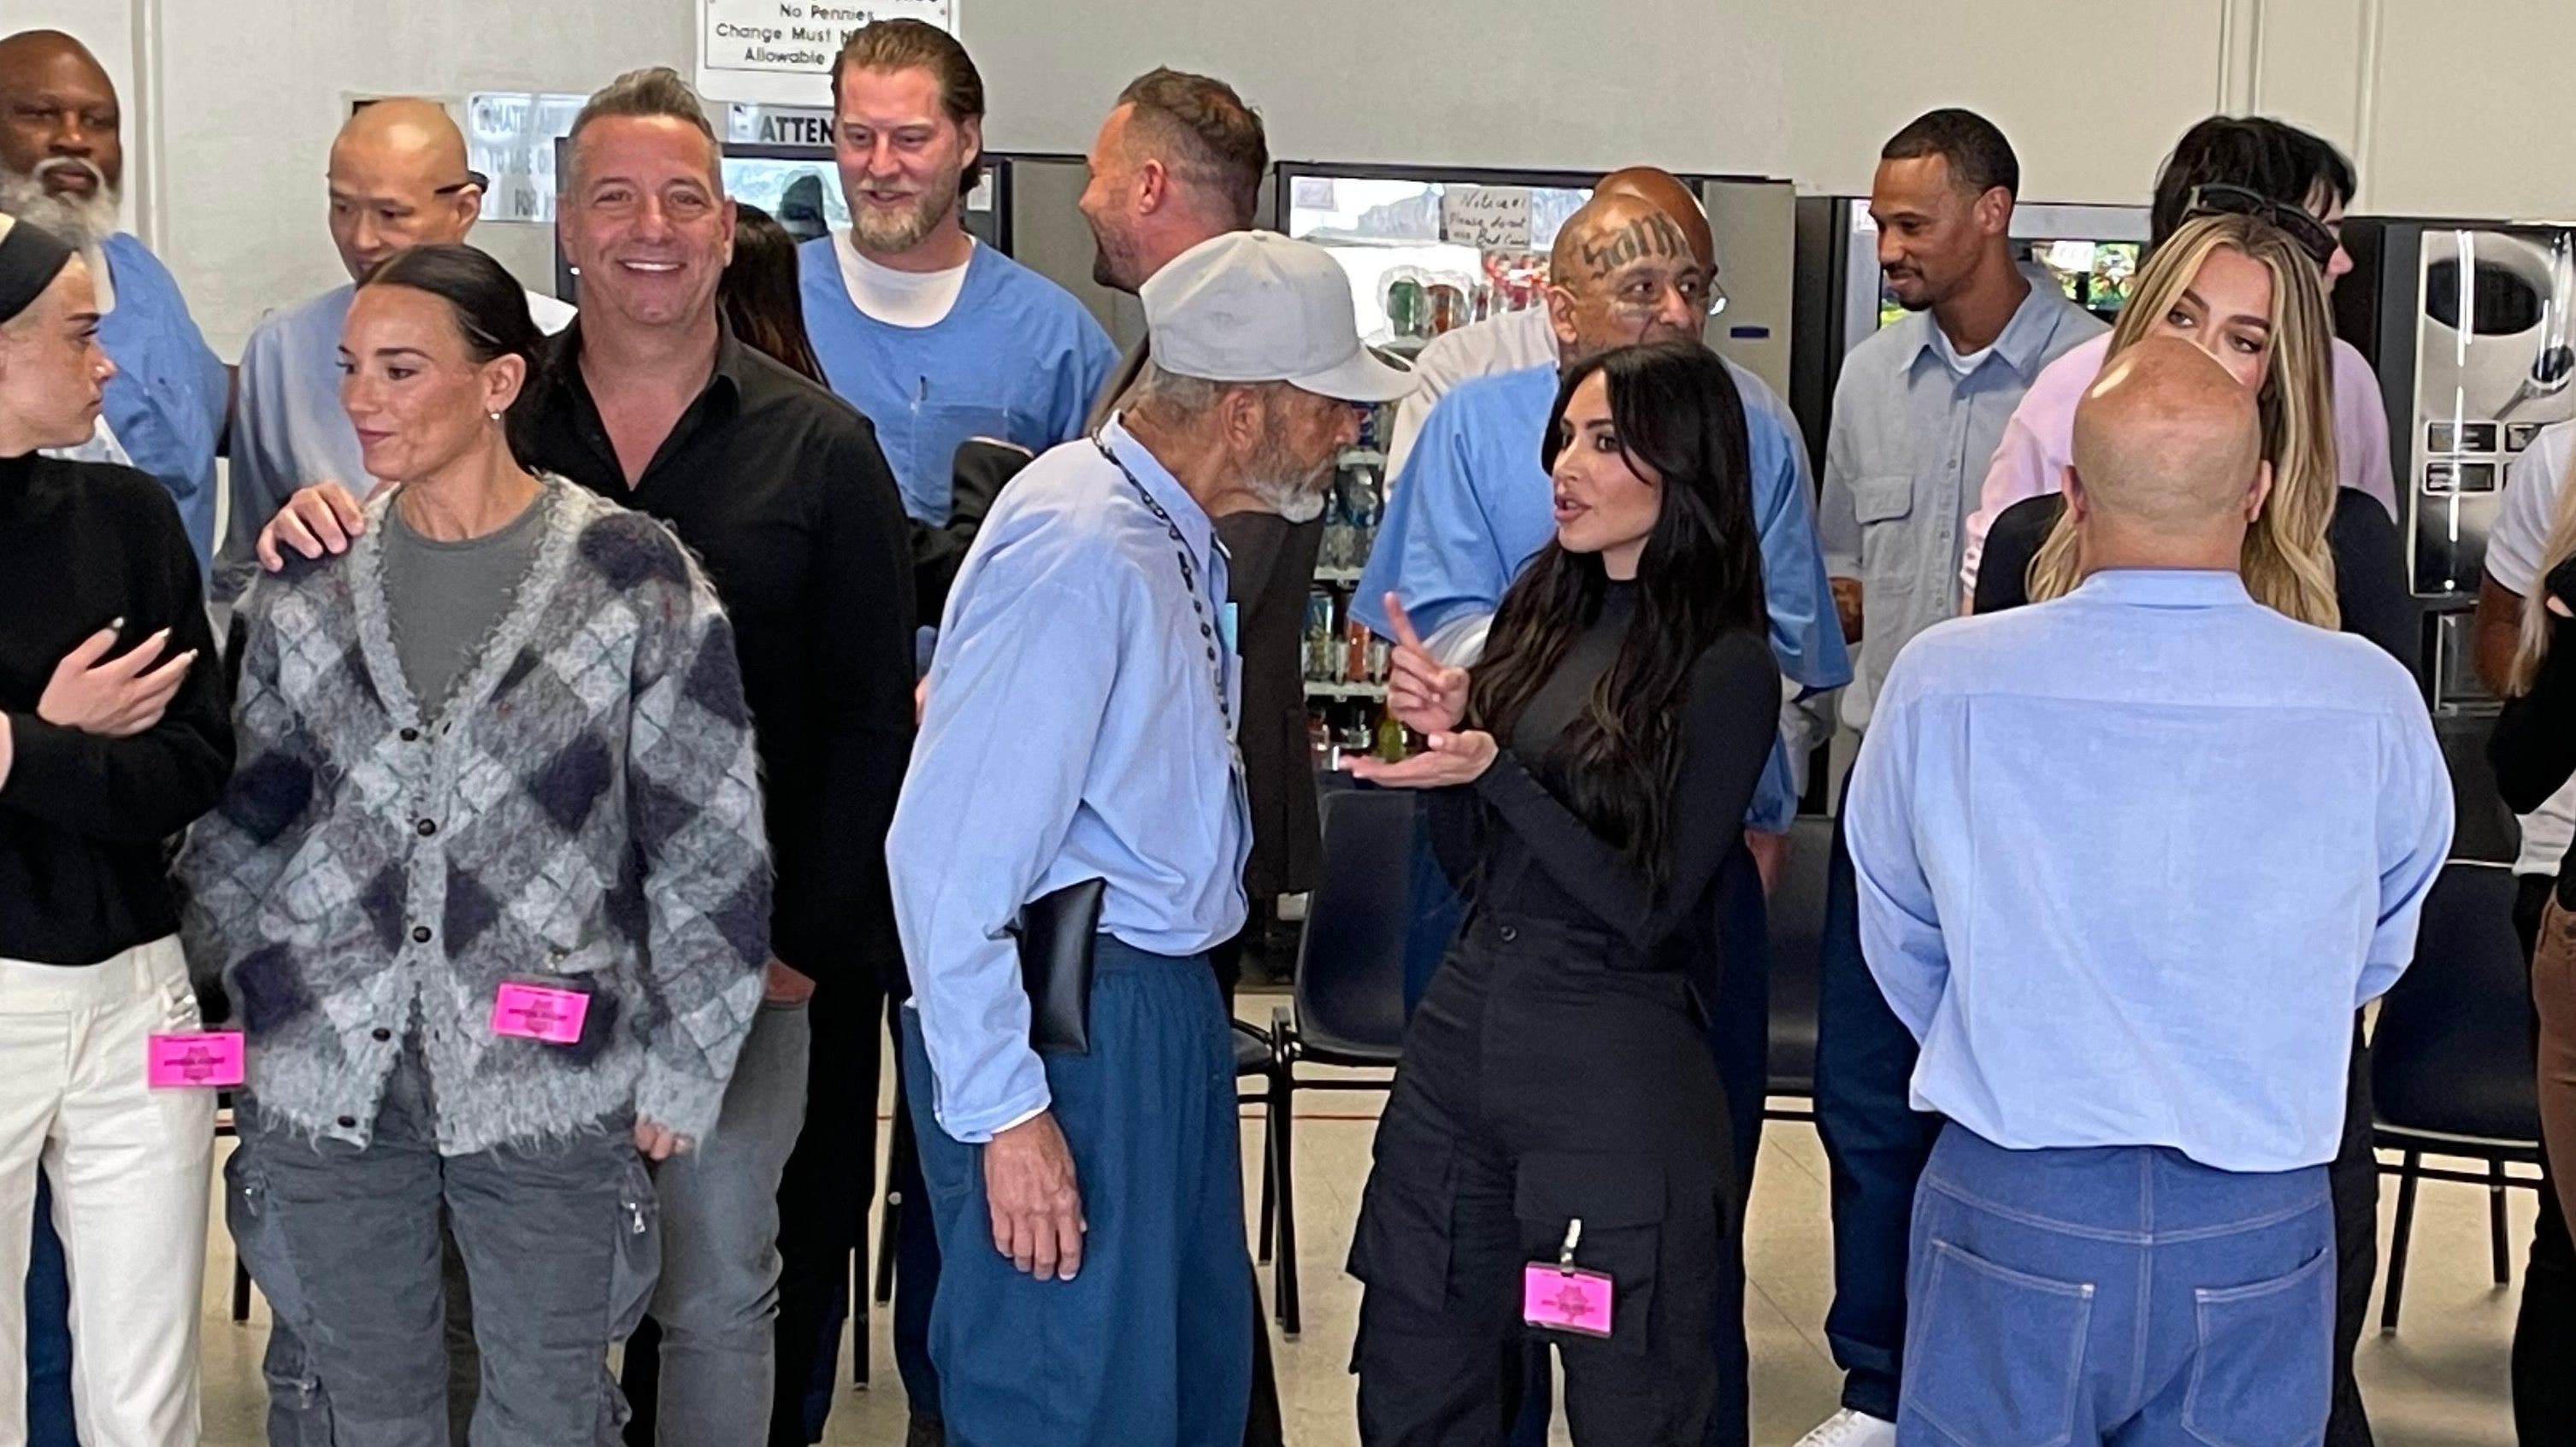 Kim Kardashian leads young influencers on Los Angeles prison trip to raise criminal justice reform awareness